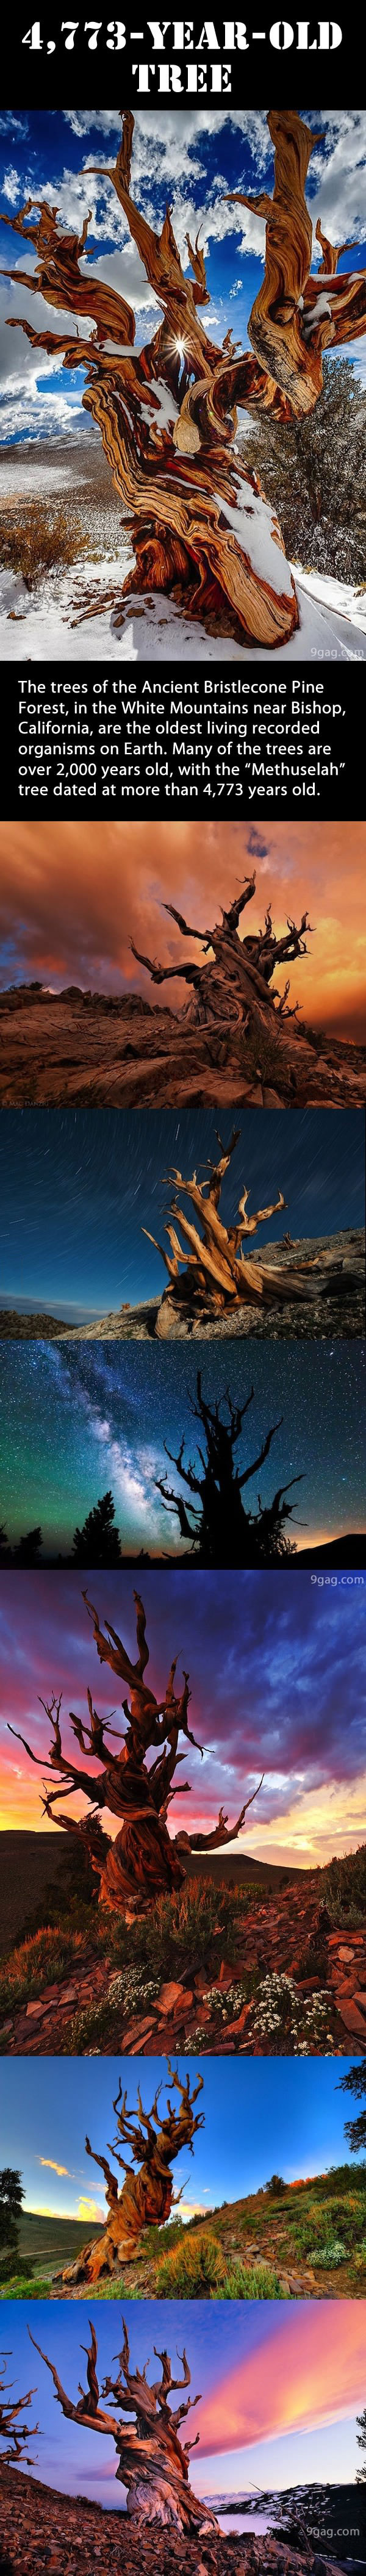 oldest living creature, tree, long, beautiful, story